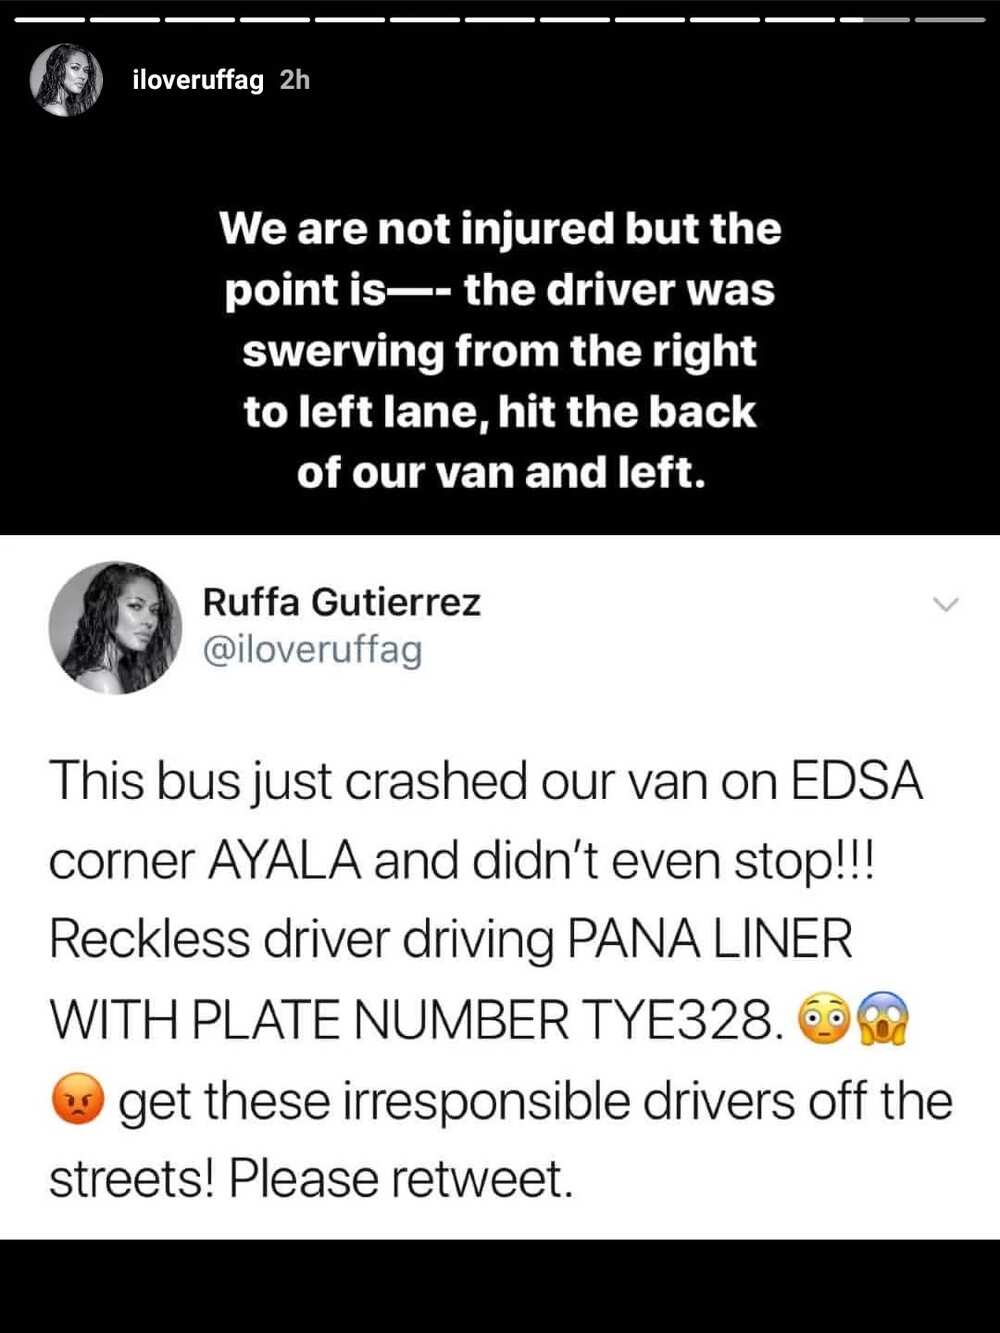 "Get these irresponsible drivers off the streets!" Ruffa Gutierrez calls out bus who hit their van